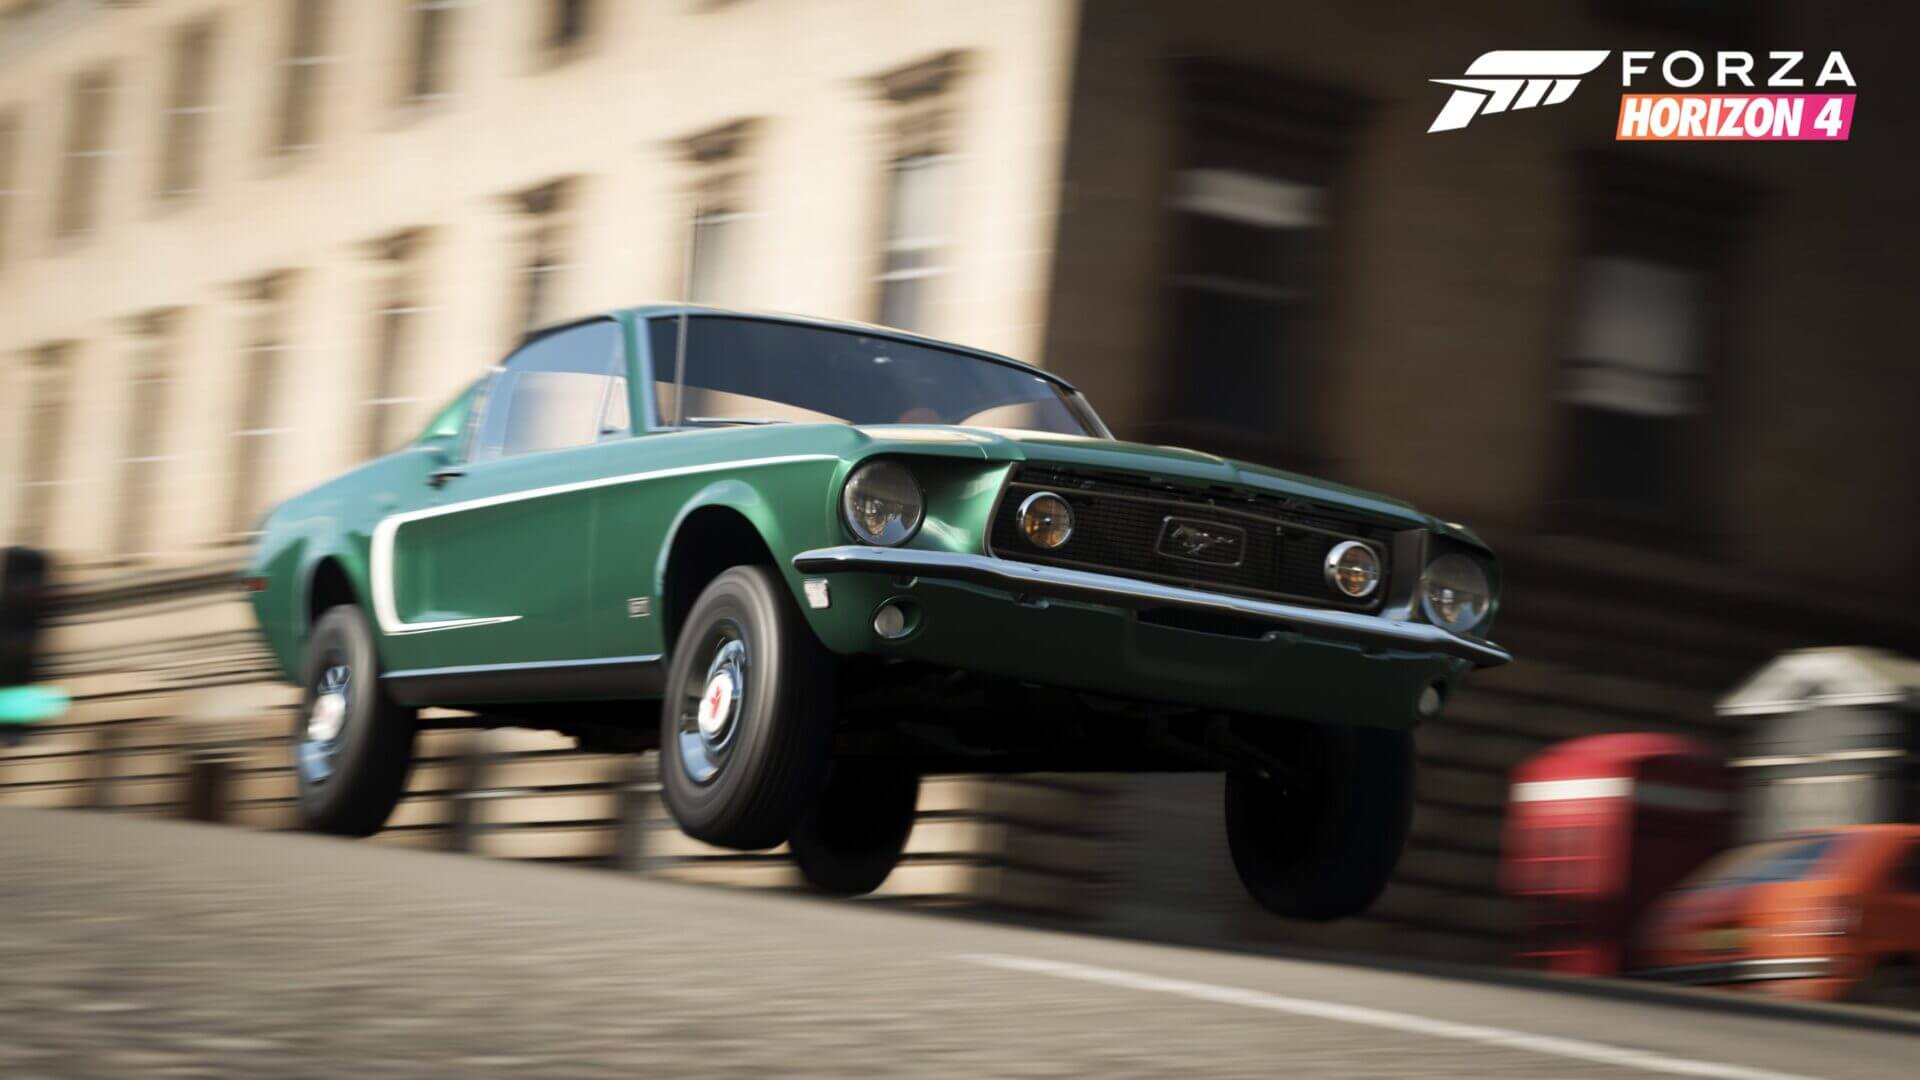 Buy Ford V Ferrari Get A 1968 Ford Mustang Gt Free In Forza Horizon 4